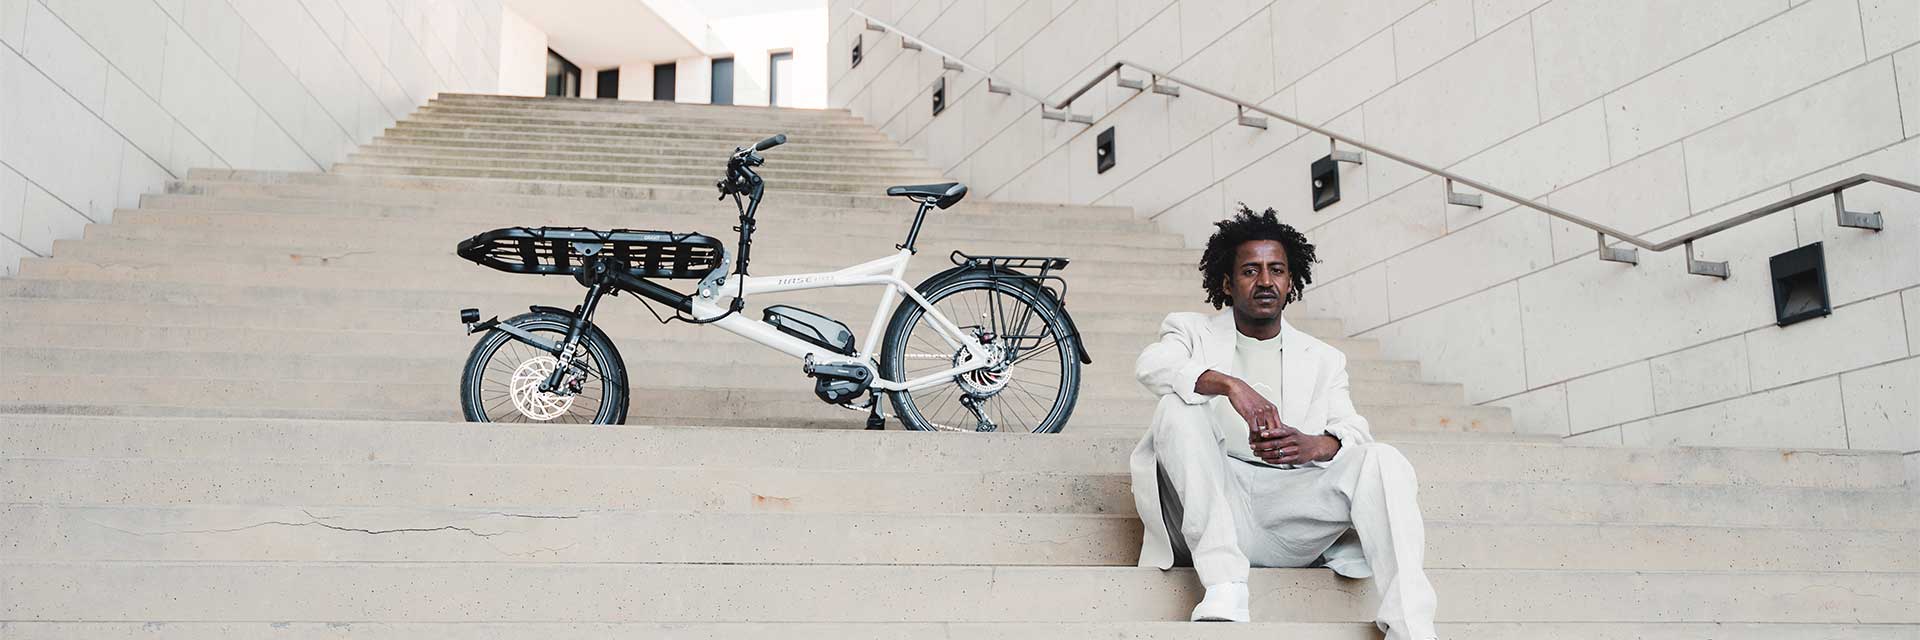 The Hase Gravit City E bike is seen parked on an outdoor stair landing, with a man in a white suit sitting on the steps in front of and below it. The bike is equipped with a cargo board and motor.